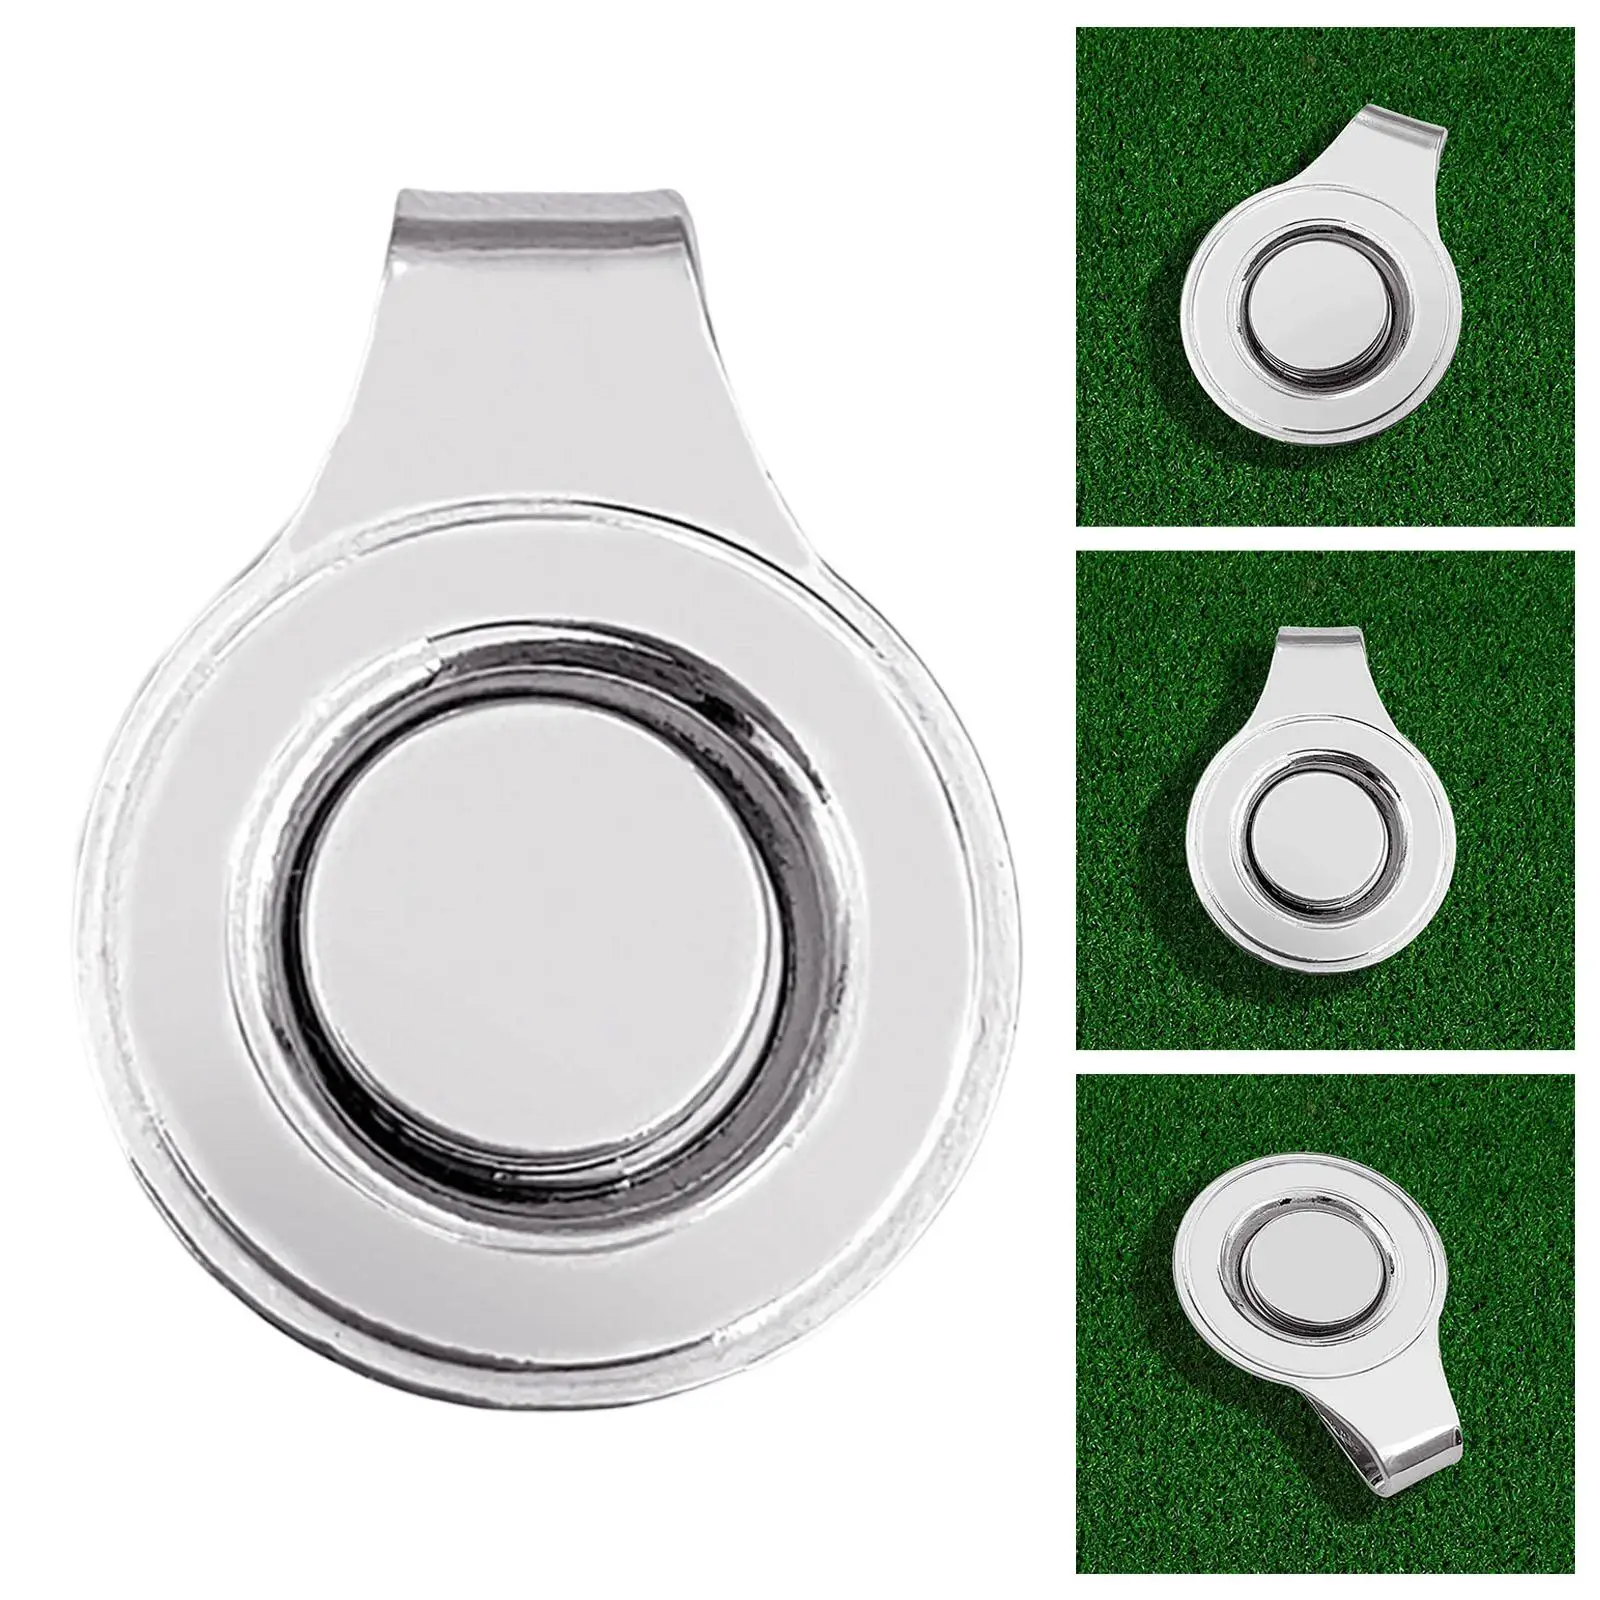 Magnetic Golf Caps Clip Clamp Ball Marker Holder Easily Take and Use golf Accessory Built in Magnet Convenient Universal